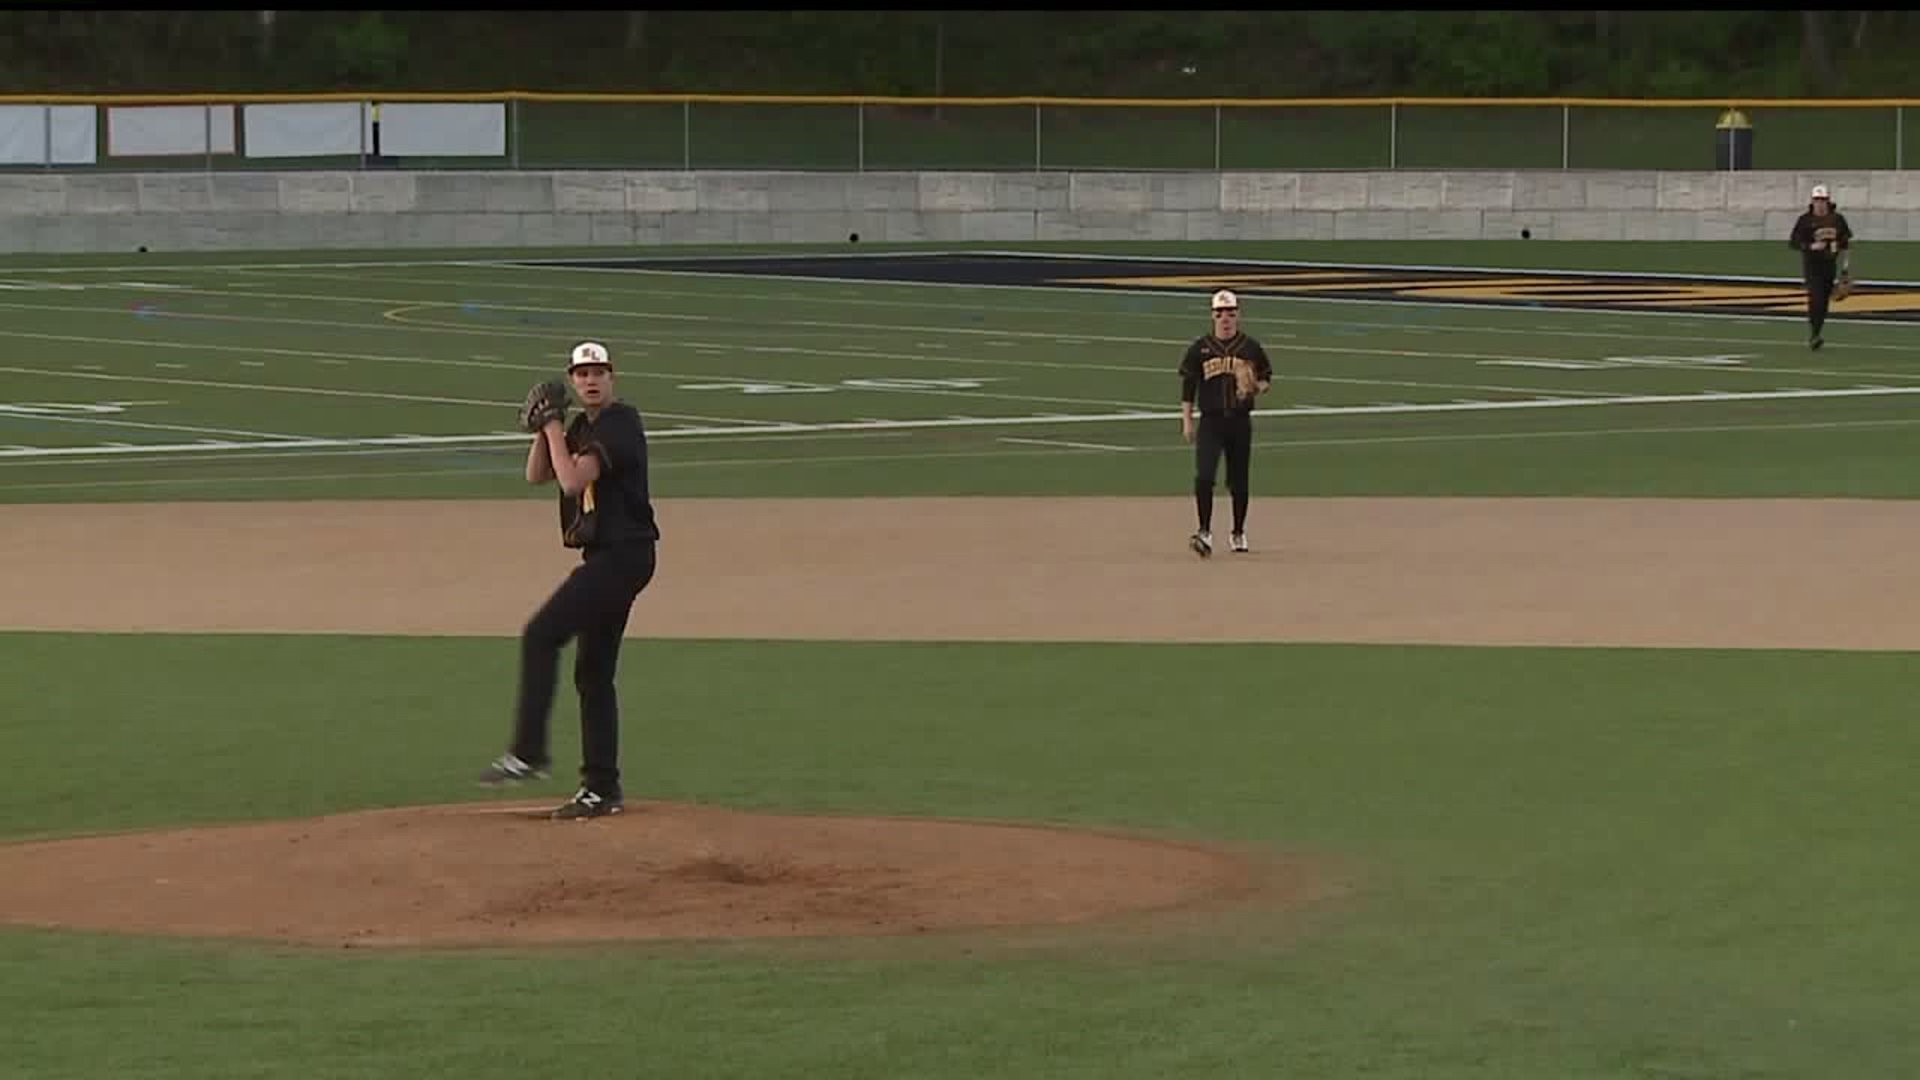 Red Lion outduels Dallastown on diamond